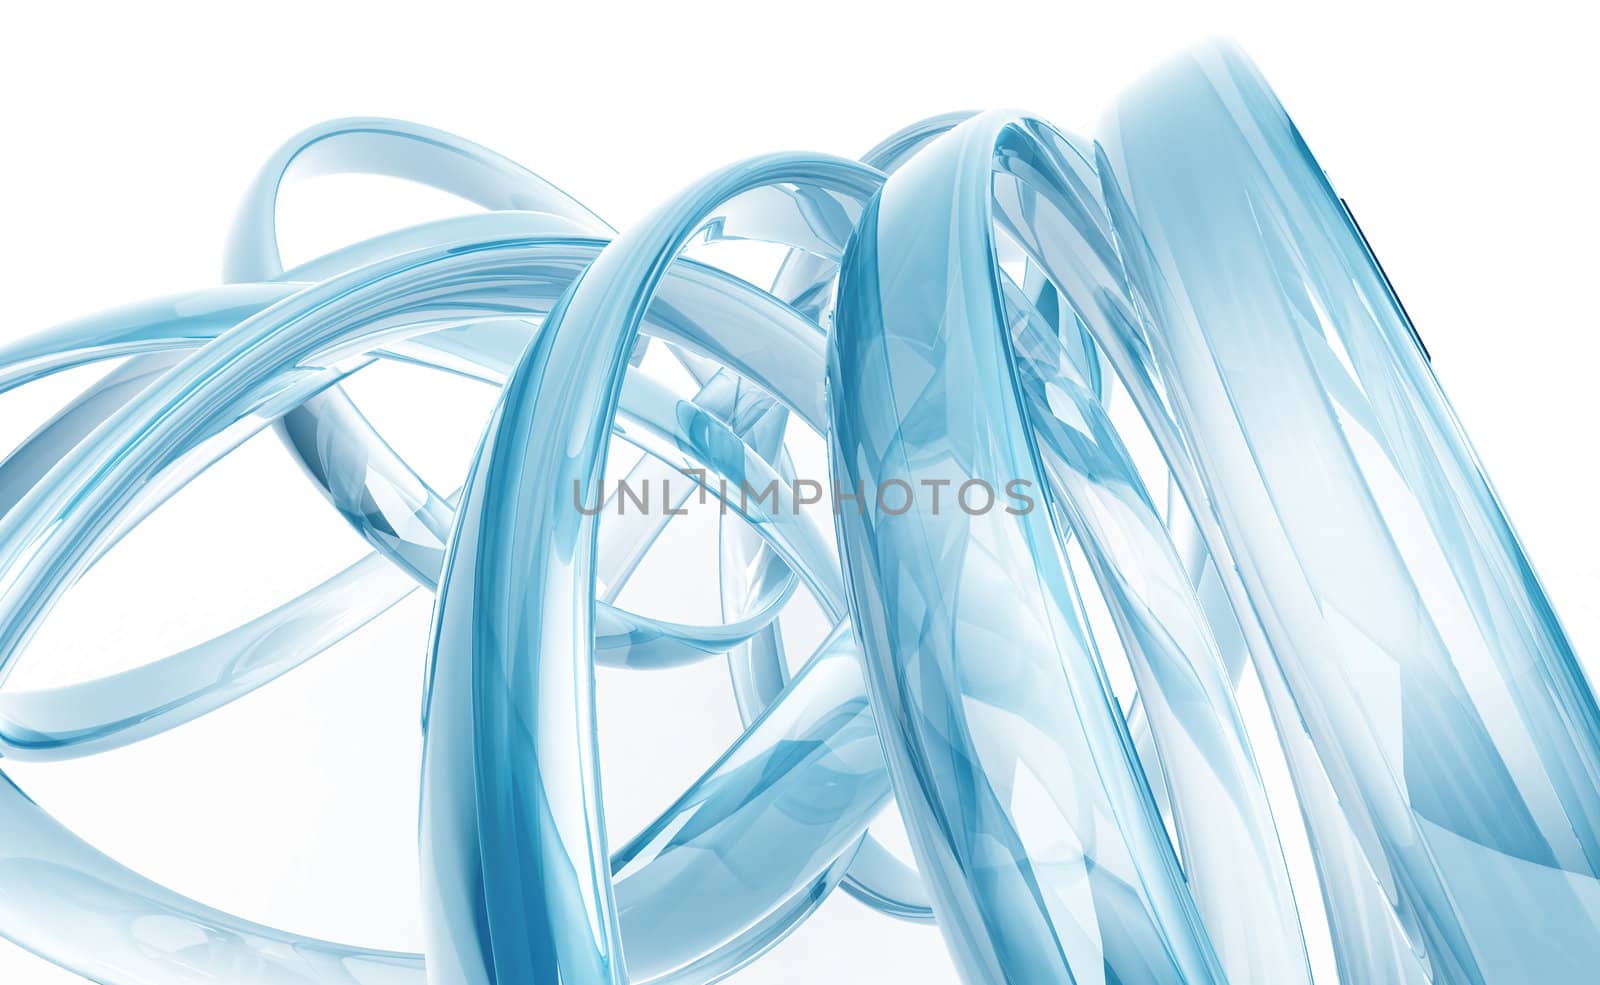 abstract transparent glass rings on white background